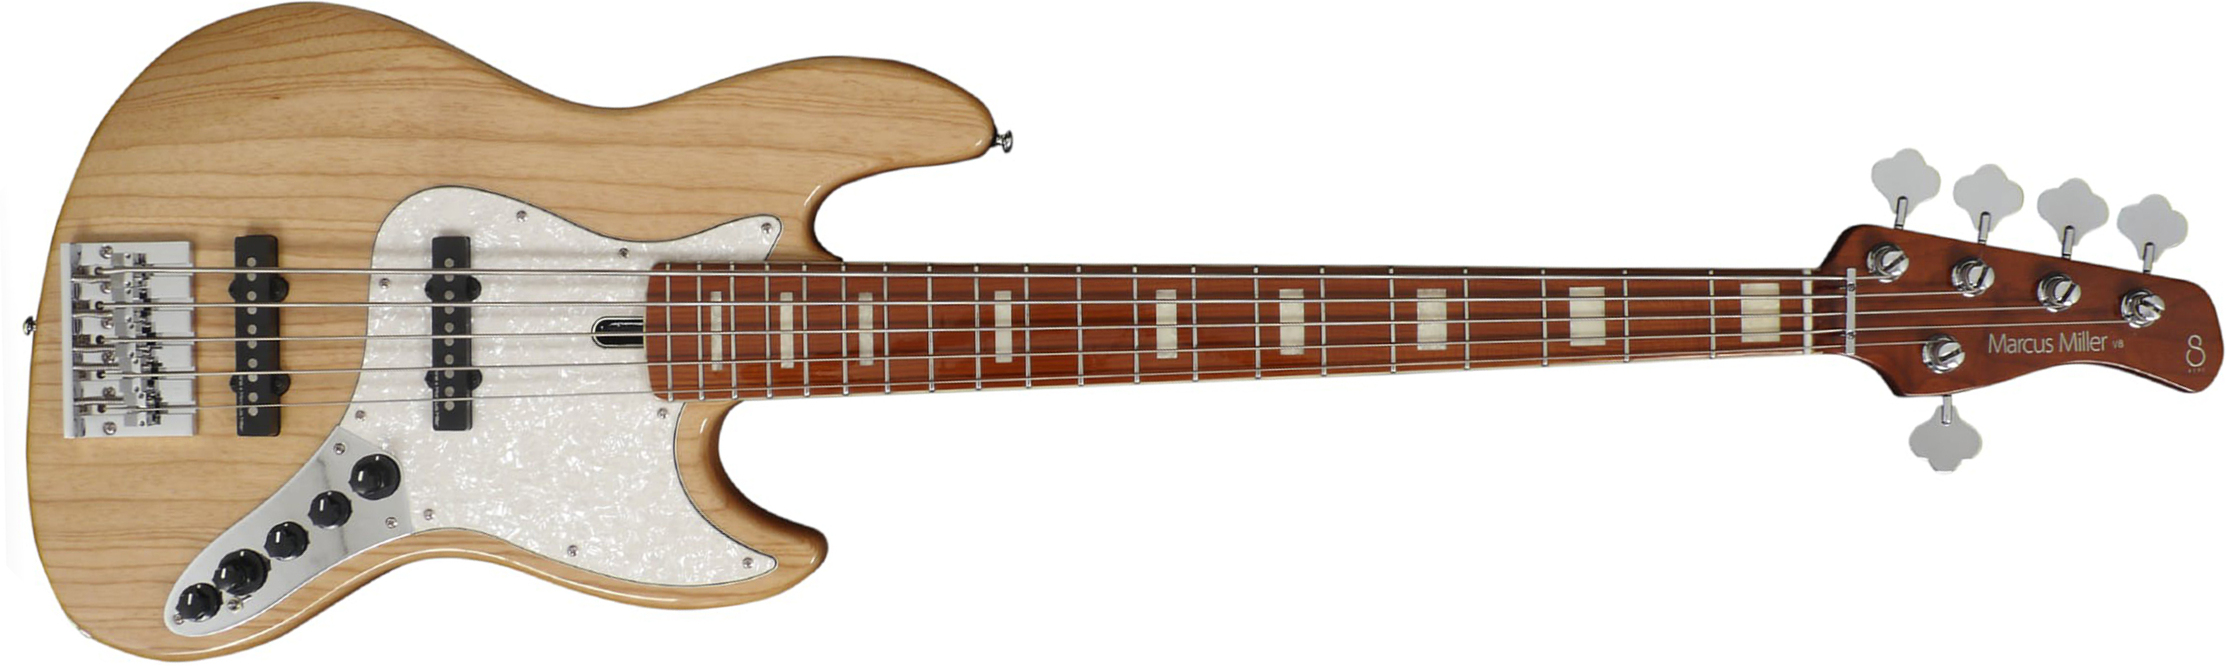 Marcus Miller V8 5st 5c Active Mn - Natural - Solidbody E-bass - Main picture